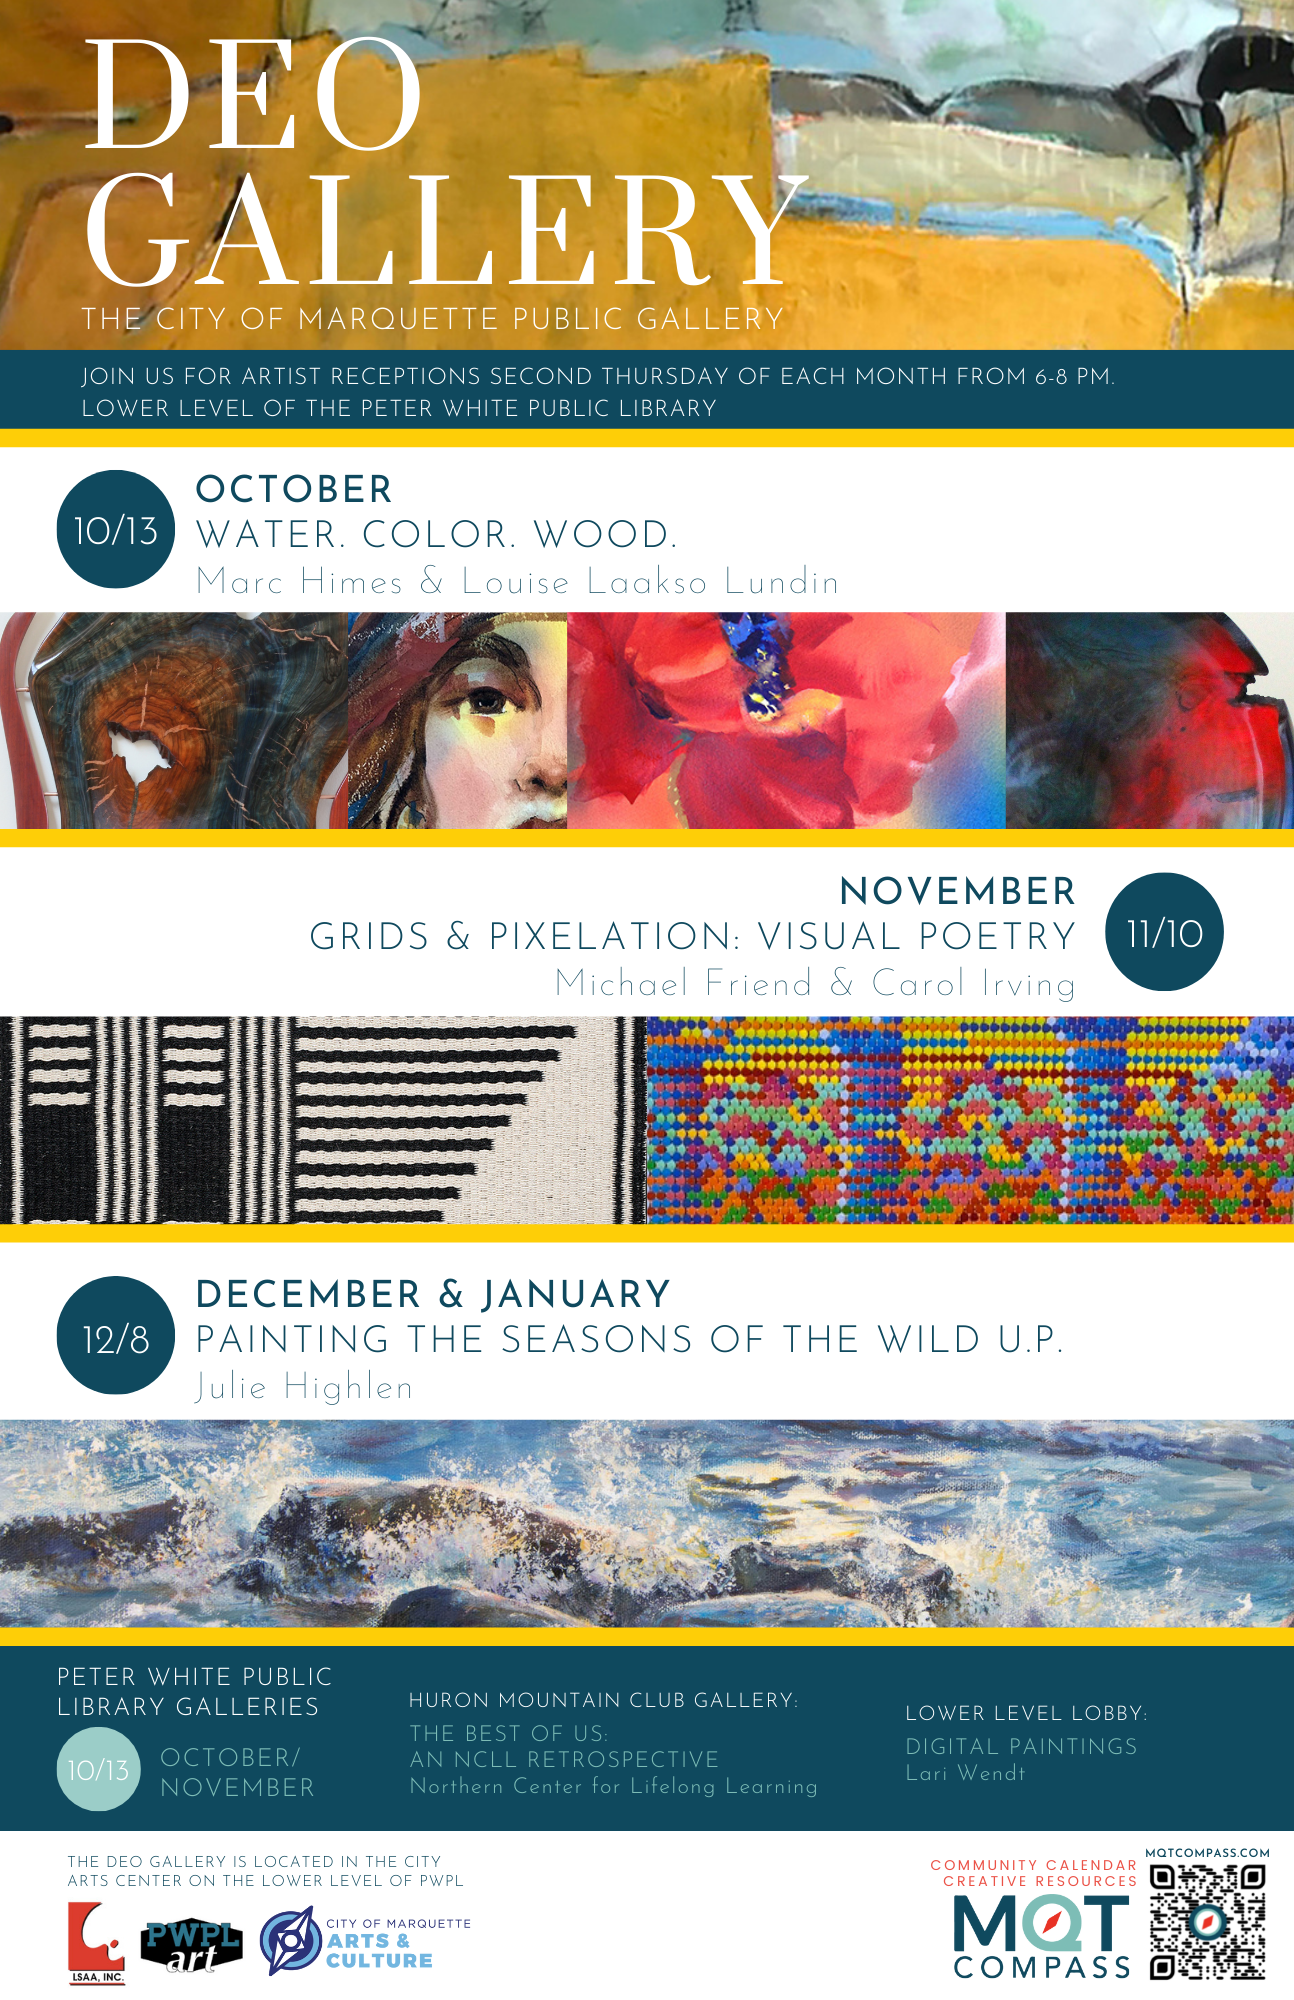 October Water Color Wood by Marc Himes and Louise Laakso Lundin
November Grids and Pixelation: Visual Poetry by Michael Friend and Carol Irving
December and January Painting the Seasons of the Wil U.P. by Julie Highlen